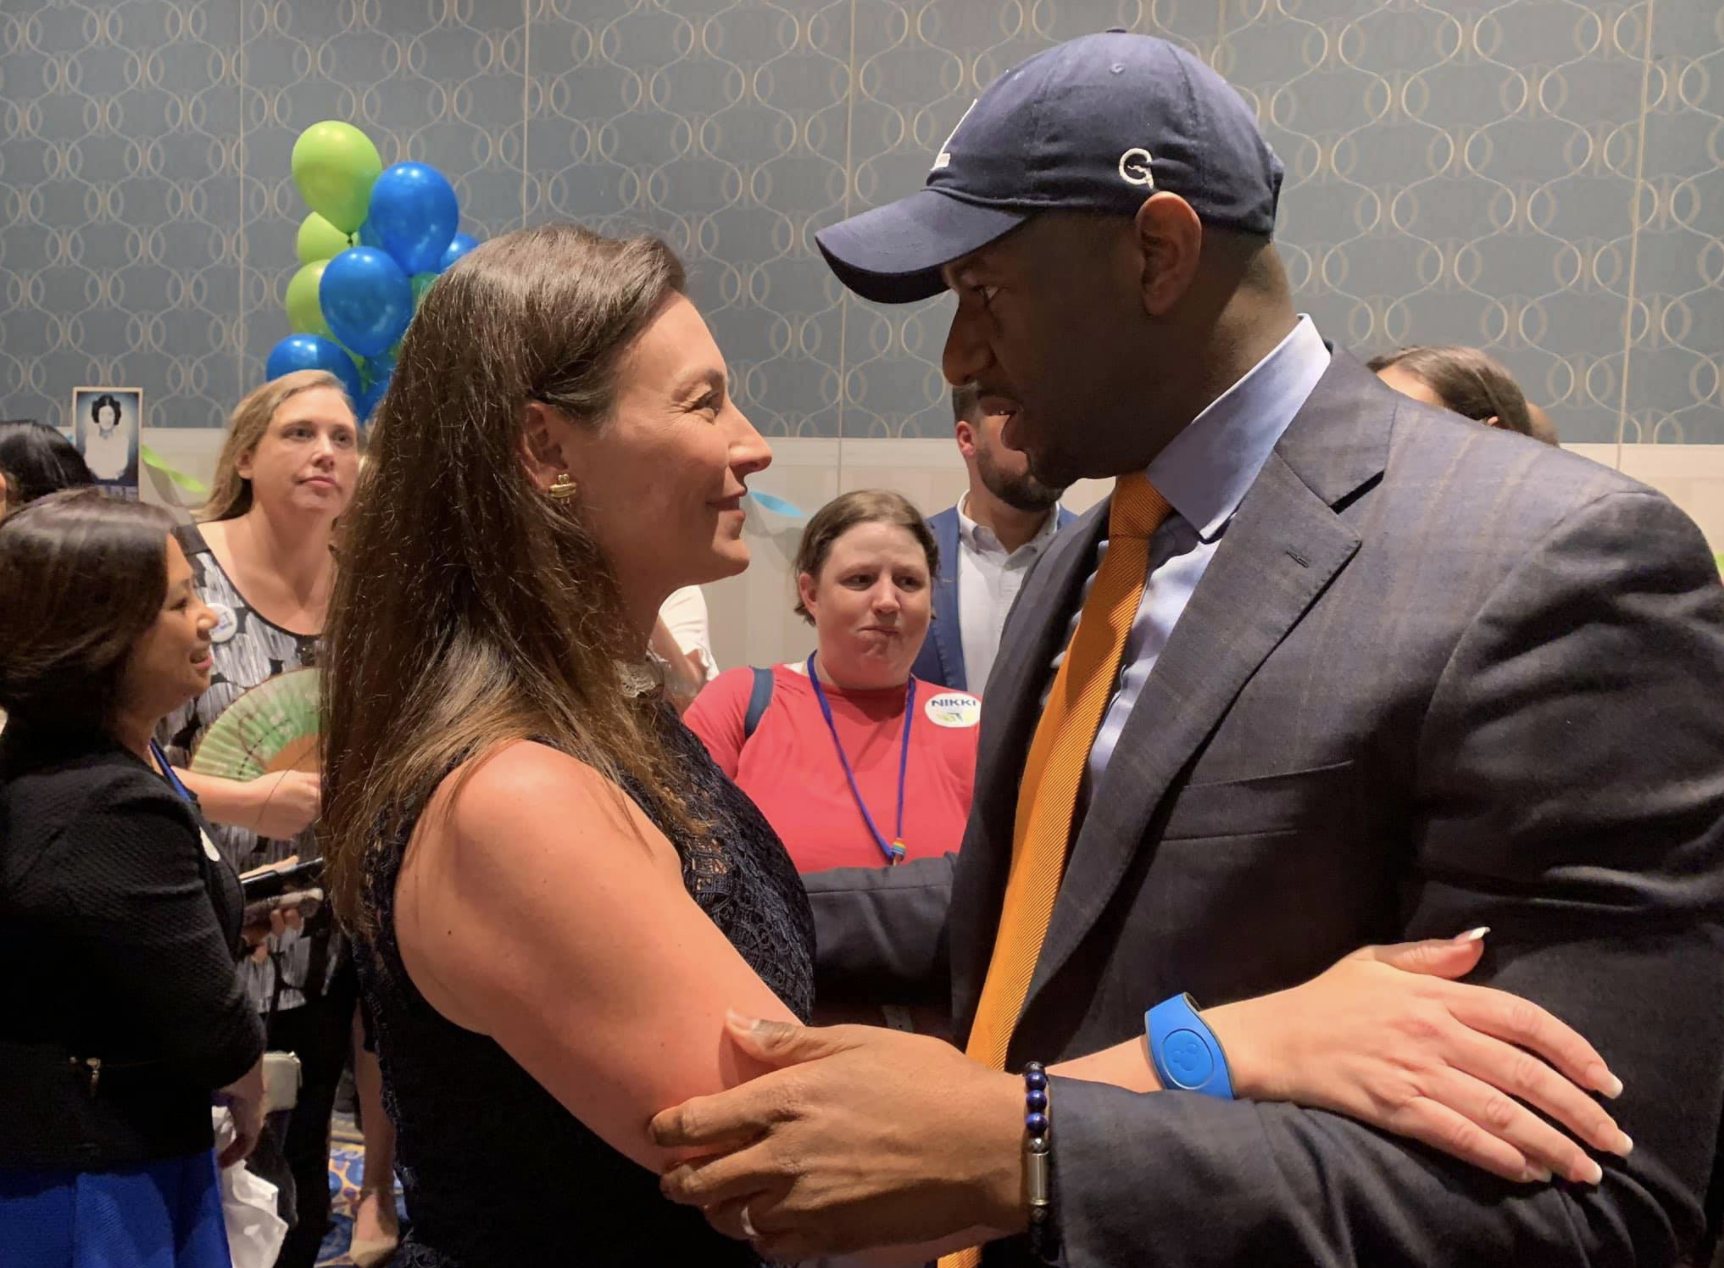 JUICE — Florida Politics' Juicy Read — 6.7.2021 — Nikki Fried's Hug With Andrew Gillum — VP Harris Told to 'Go Home' by Guatemalans — More...